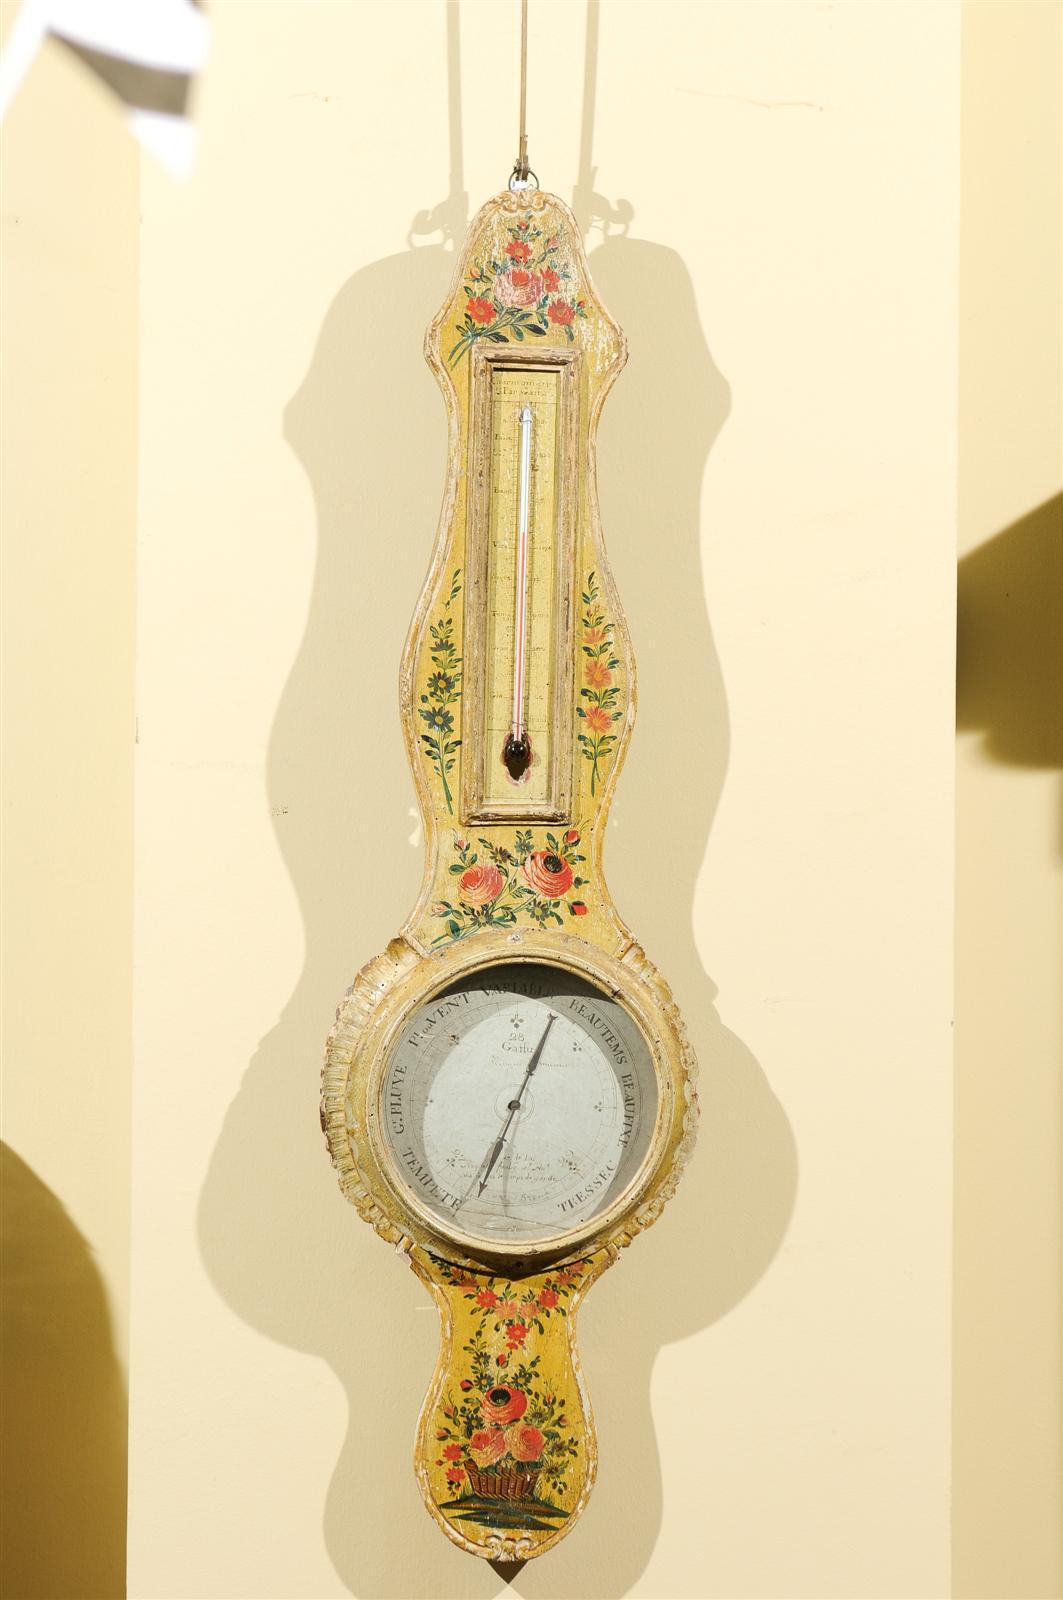 18th Century Painted Barometer from France, Circa 1780
A barometer much like a clock adds personality to any setting.  This one also brings color and charm with its very decorative painting of baskets of flowers.